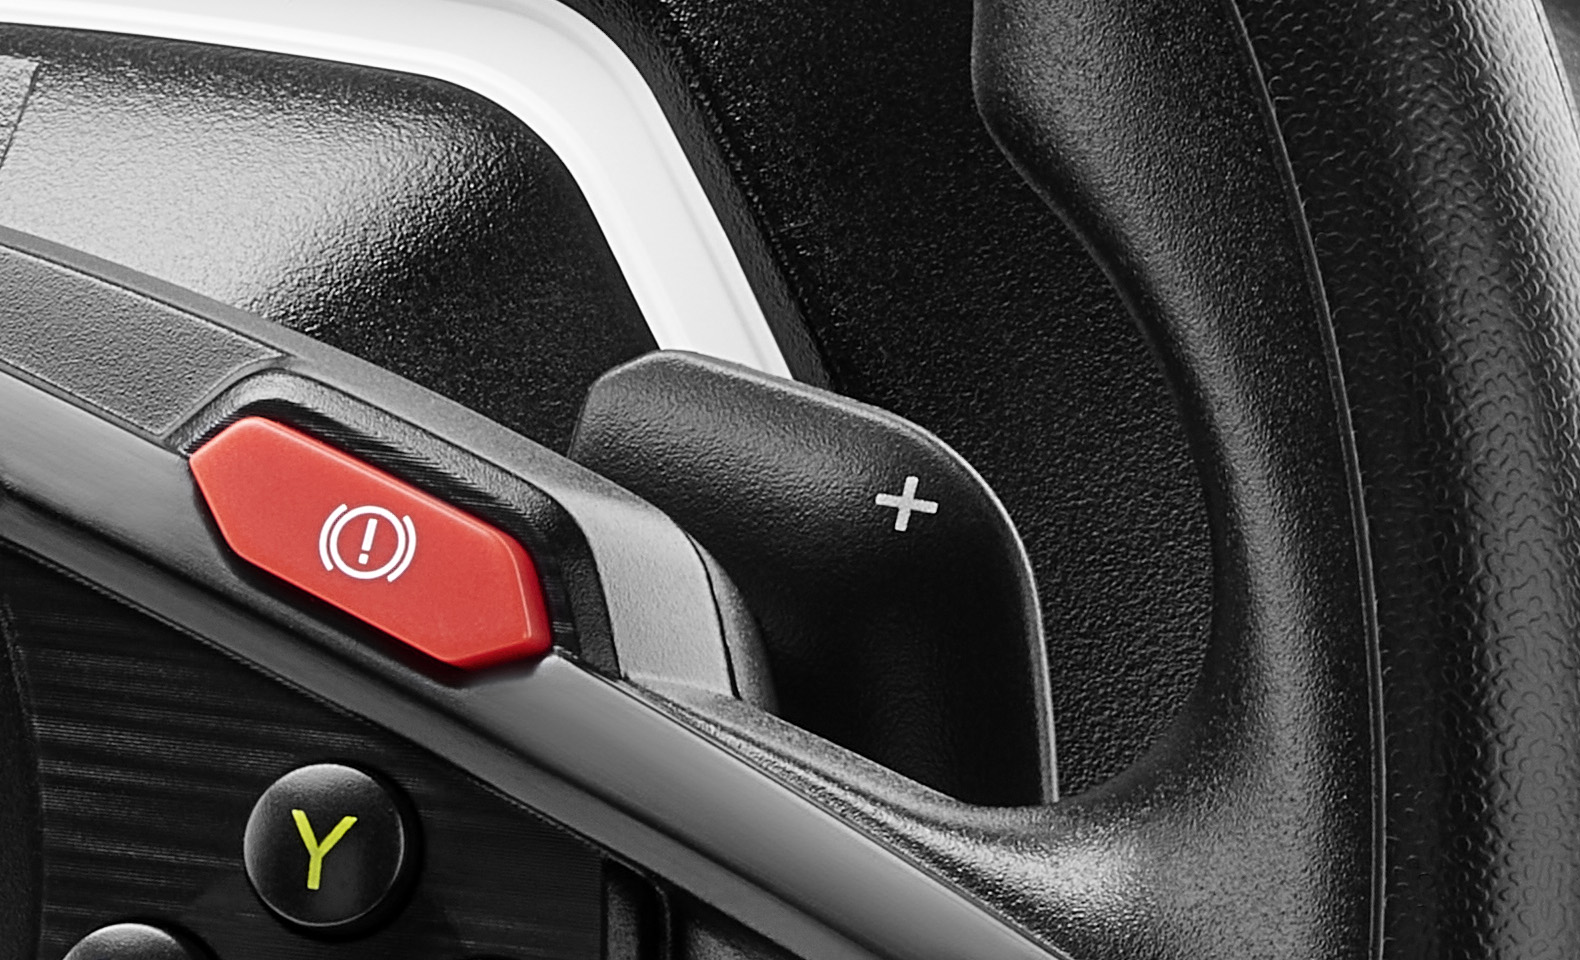 Thrustmaster Releases New Budget T128 Racing Wheel